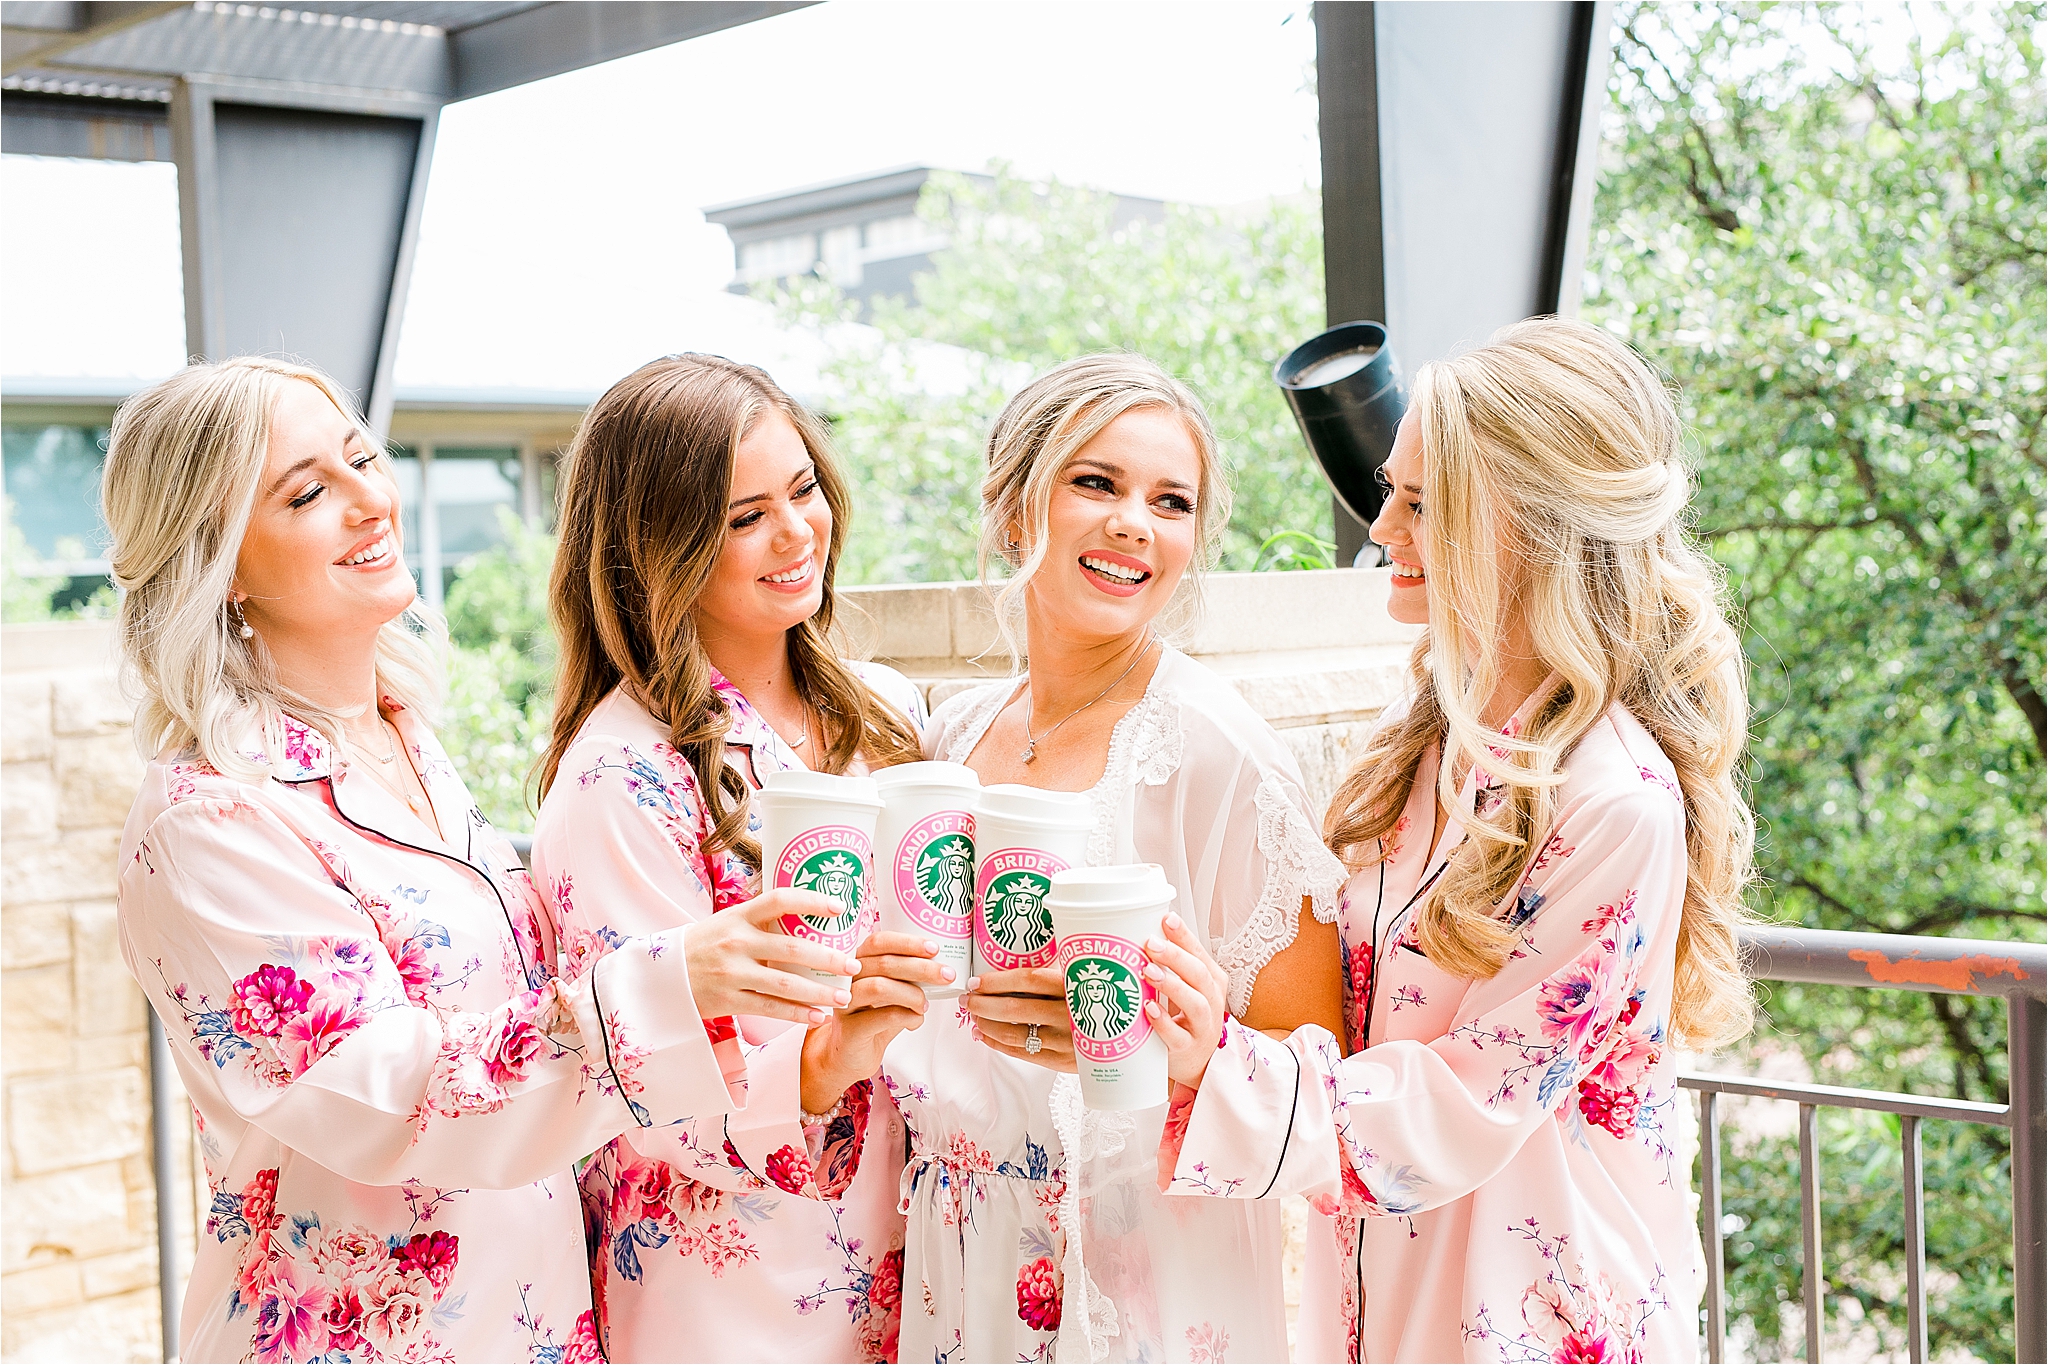 A bride and her bridesmaids cheers with their custom wedding starbucks cups perfect for wedding gifts at classic dallas wedding 